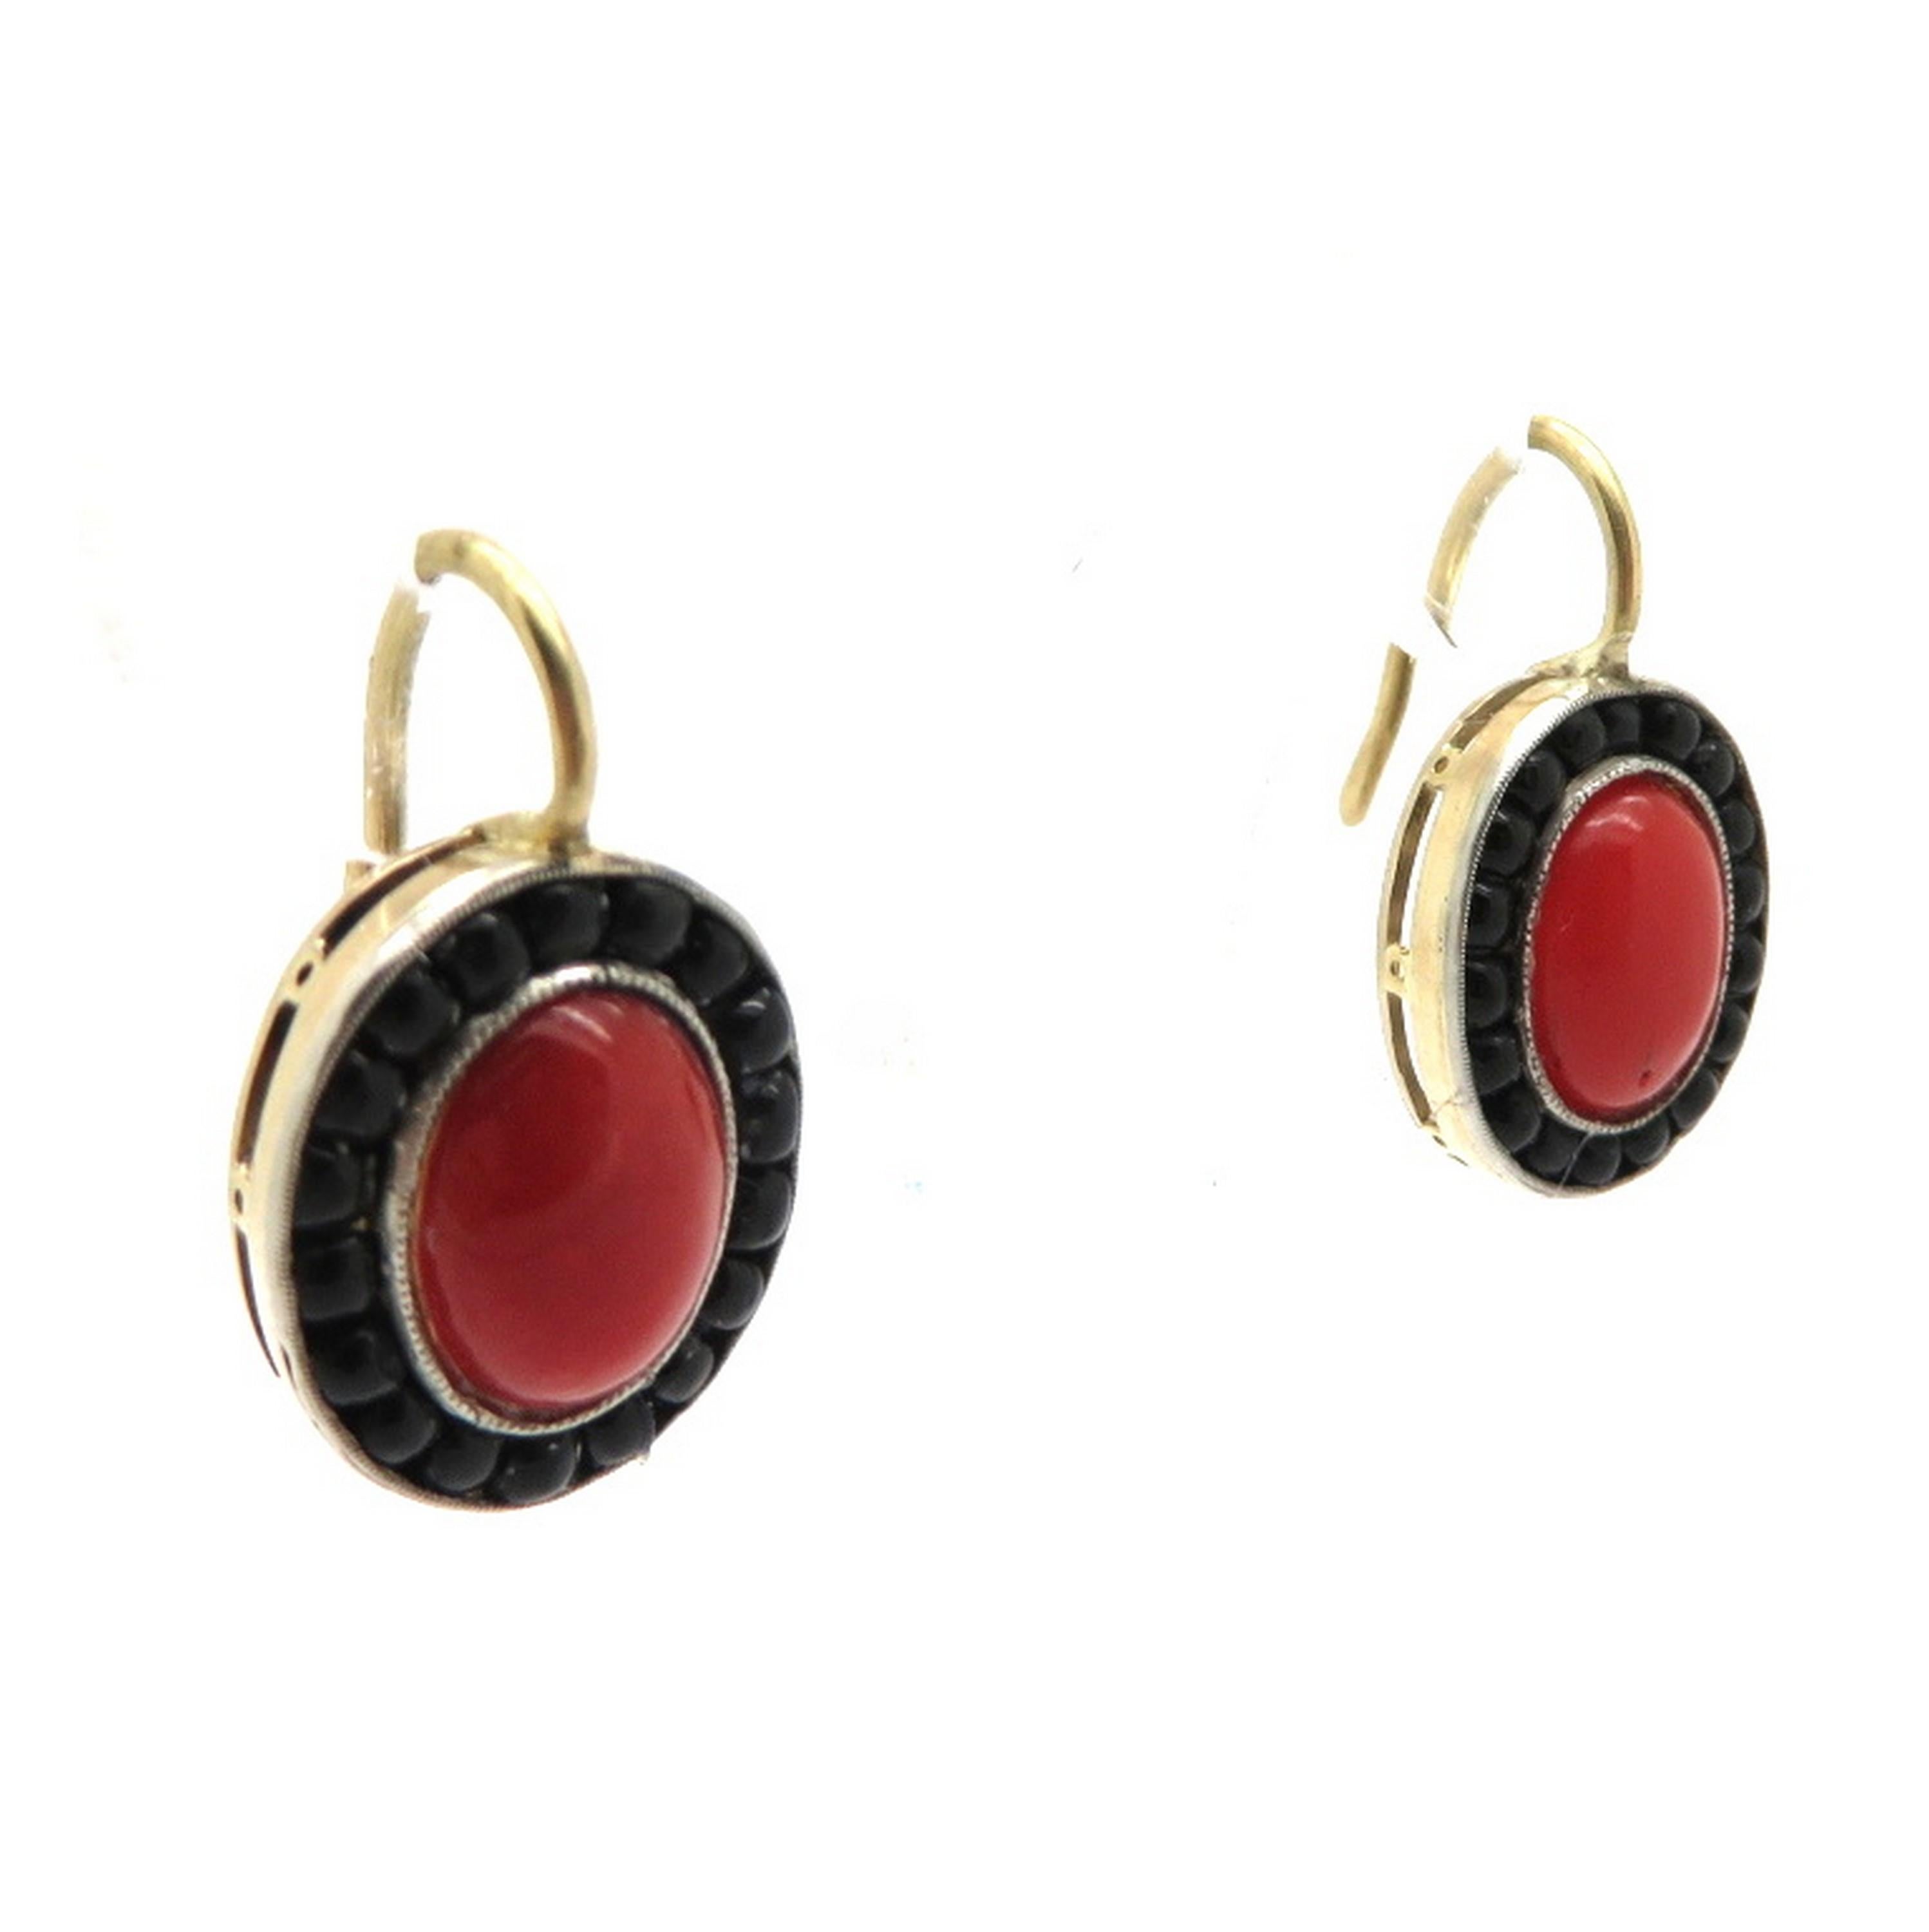 Estate 18K yellow gold 1950s coral and onyx dangle earrings. Centering two red coral cabochons. Each earring is accented with a halo with a total of 36 round cabochon black onyx channel set beads. The earrings are crafted out of 18K yellow gold and